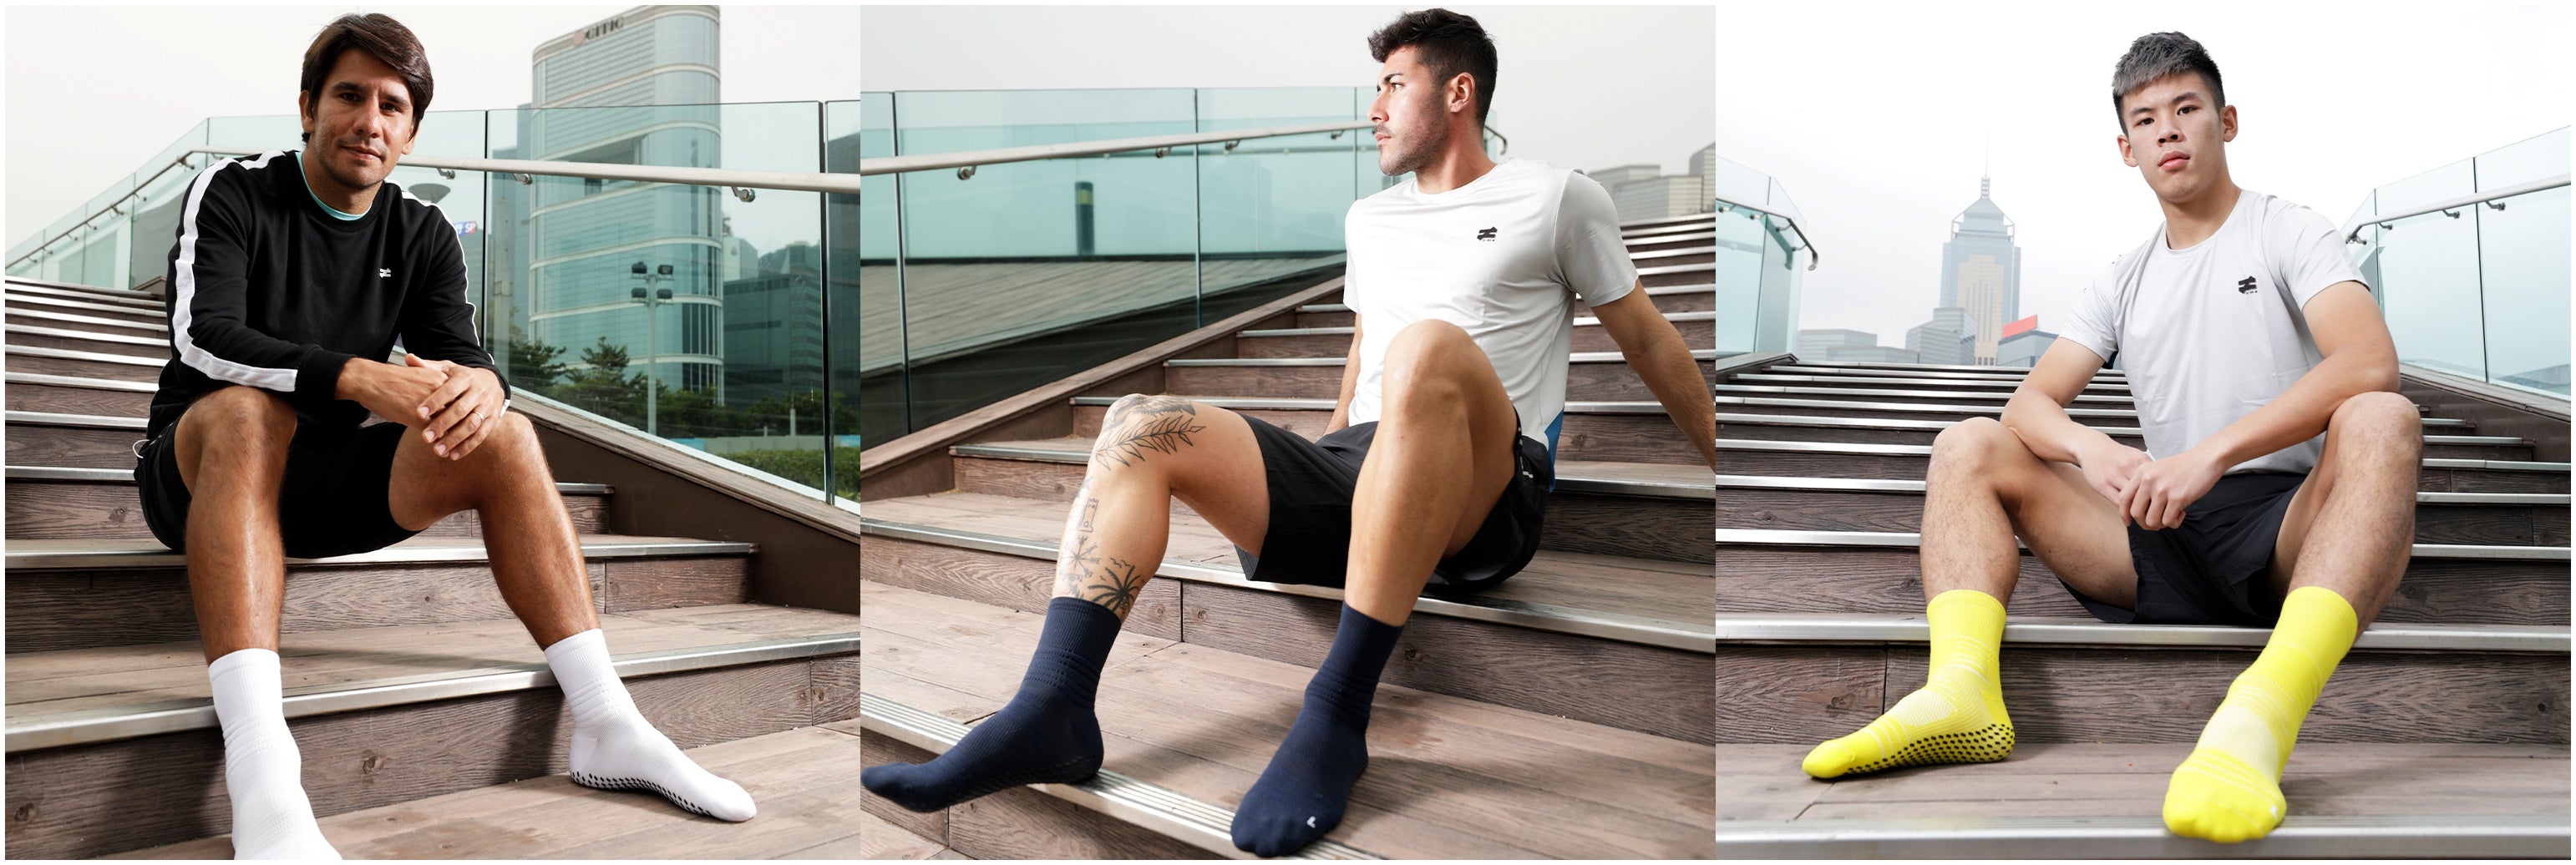 Introducing the New Generation of Zyphr Tech Grip Socks